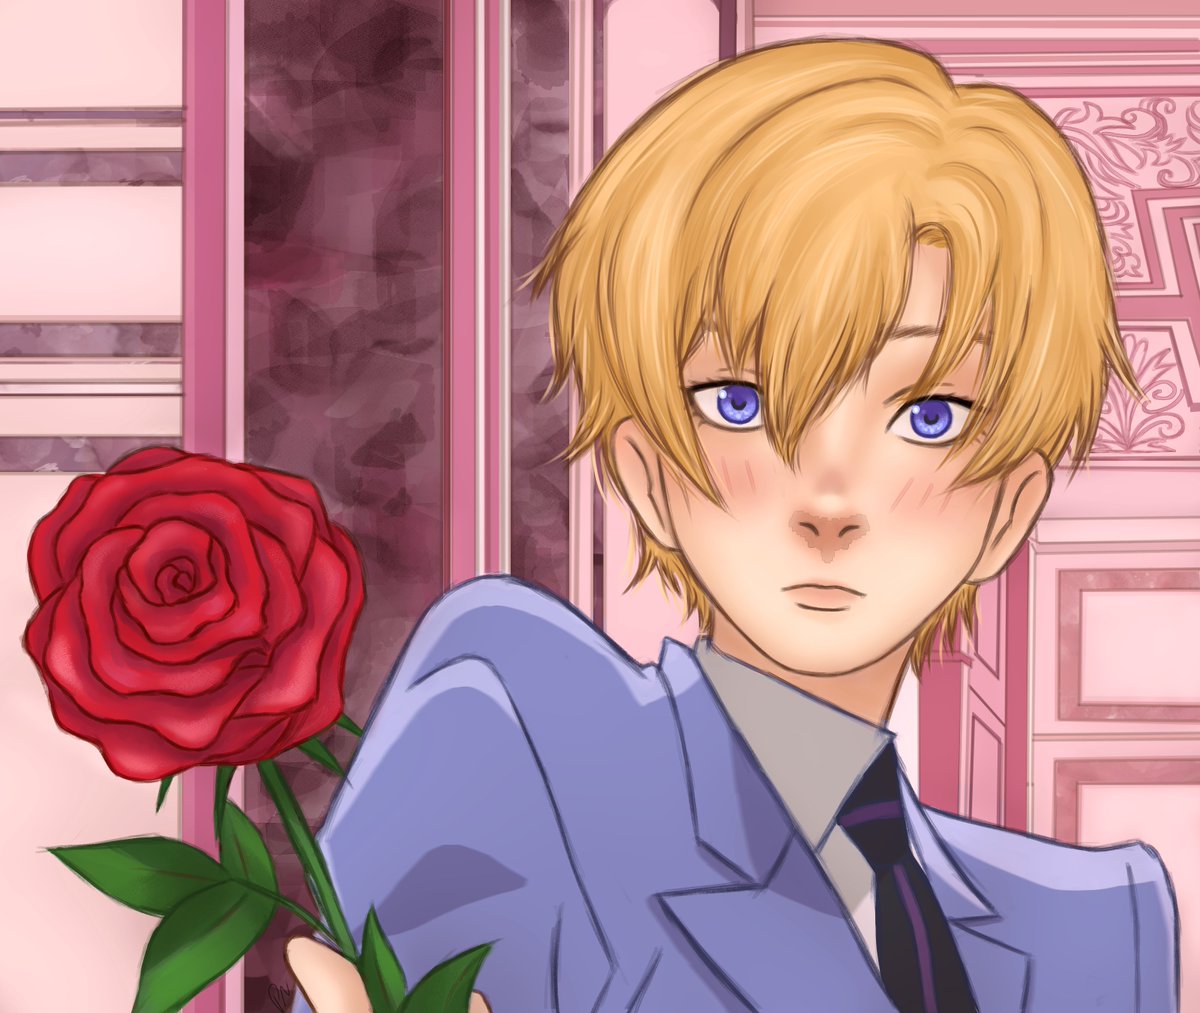 Finished? this on stream today any who thank you everyone who hung out!  #Tamakisuoh #art #digitalart #ouran #OuranHighSchoolHostClub #ohshc